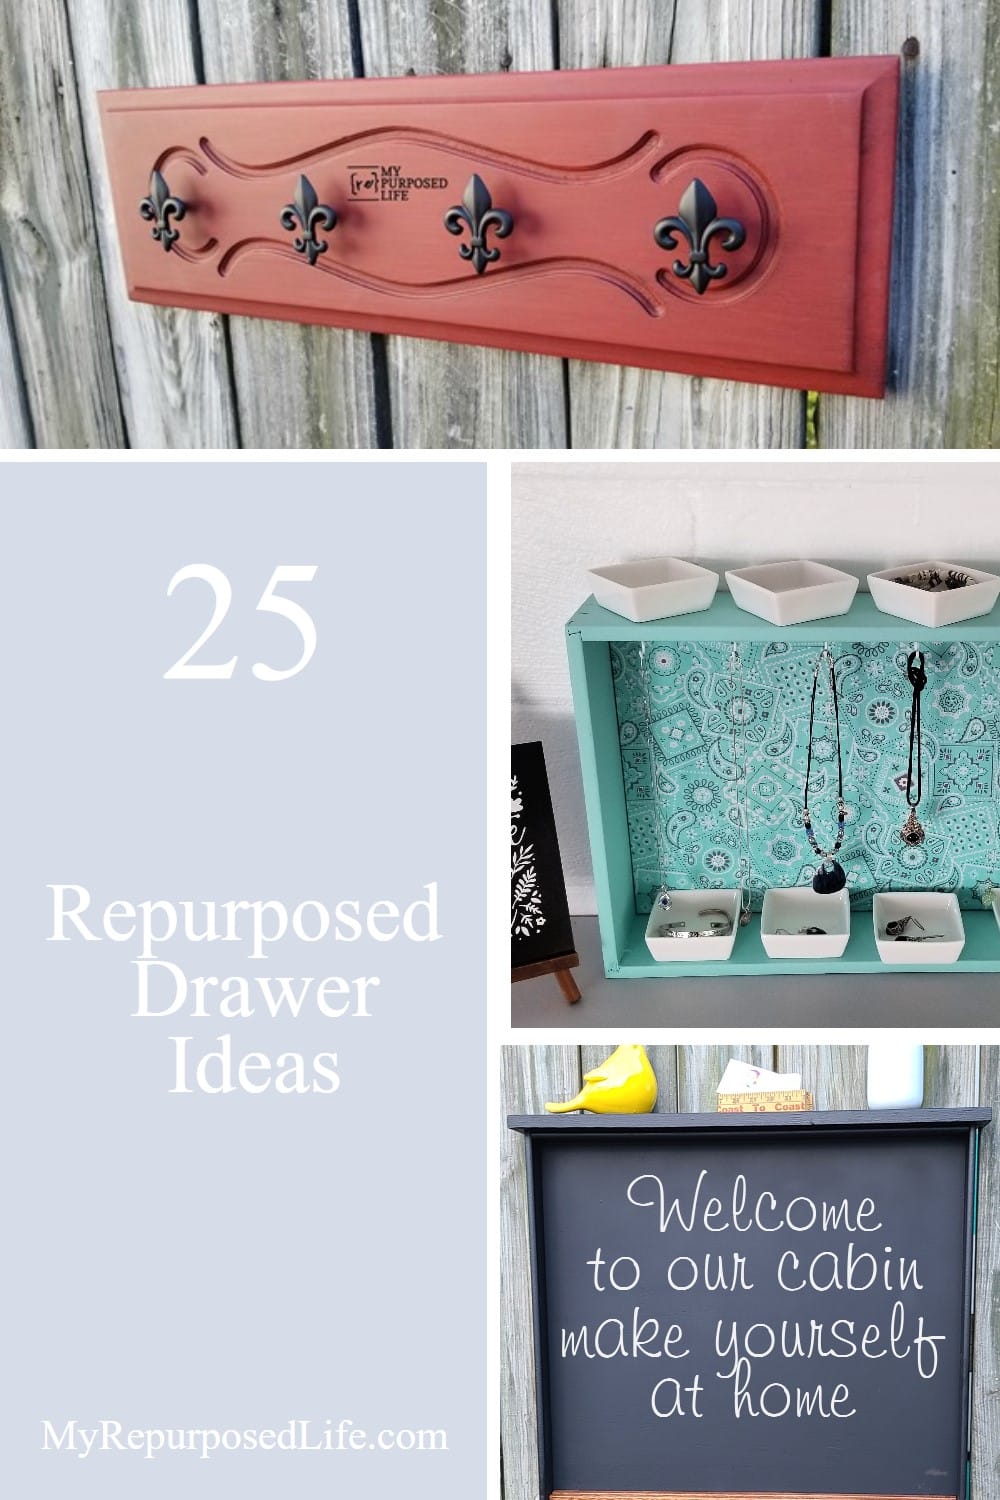 More than 25 repurposed drawer ideas and projects to inspire you to use those old, orphan drawers you have laying around. So many unique ideas in one place. Ideas for shelves, cubbies, pets and more. #MyRepurposedLife #repurposed #drawer #furniture #ideas via @repurposedlife